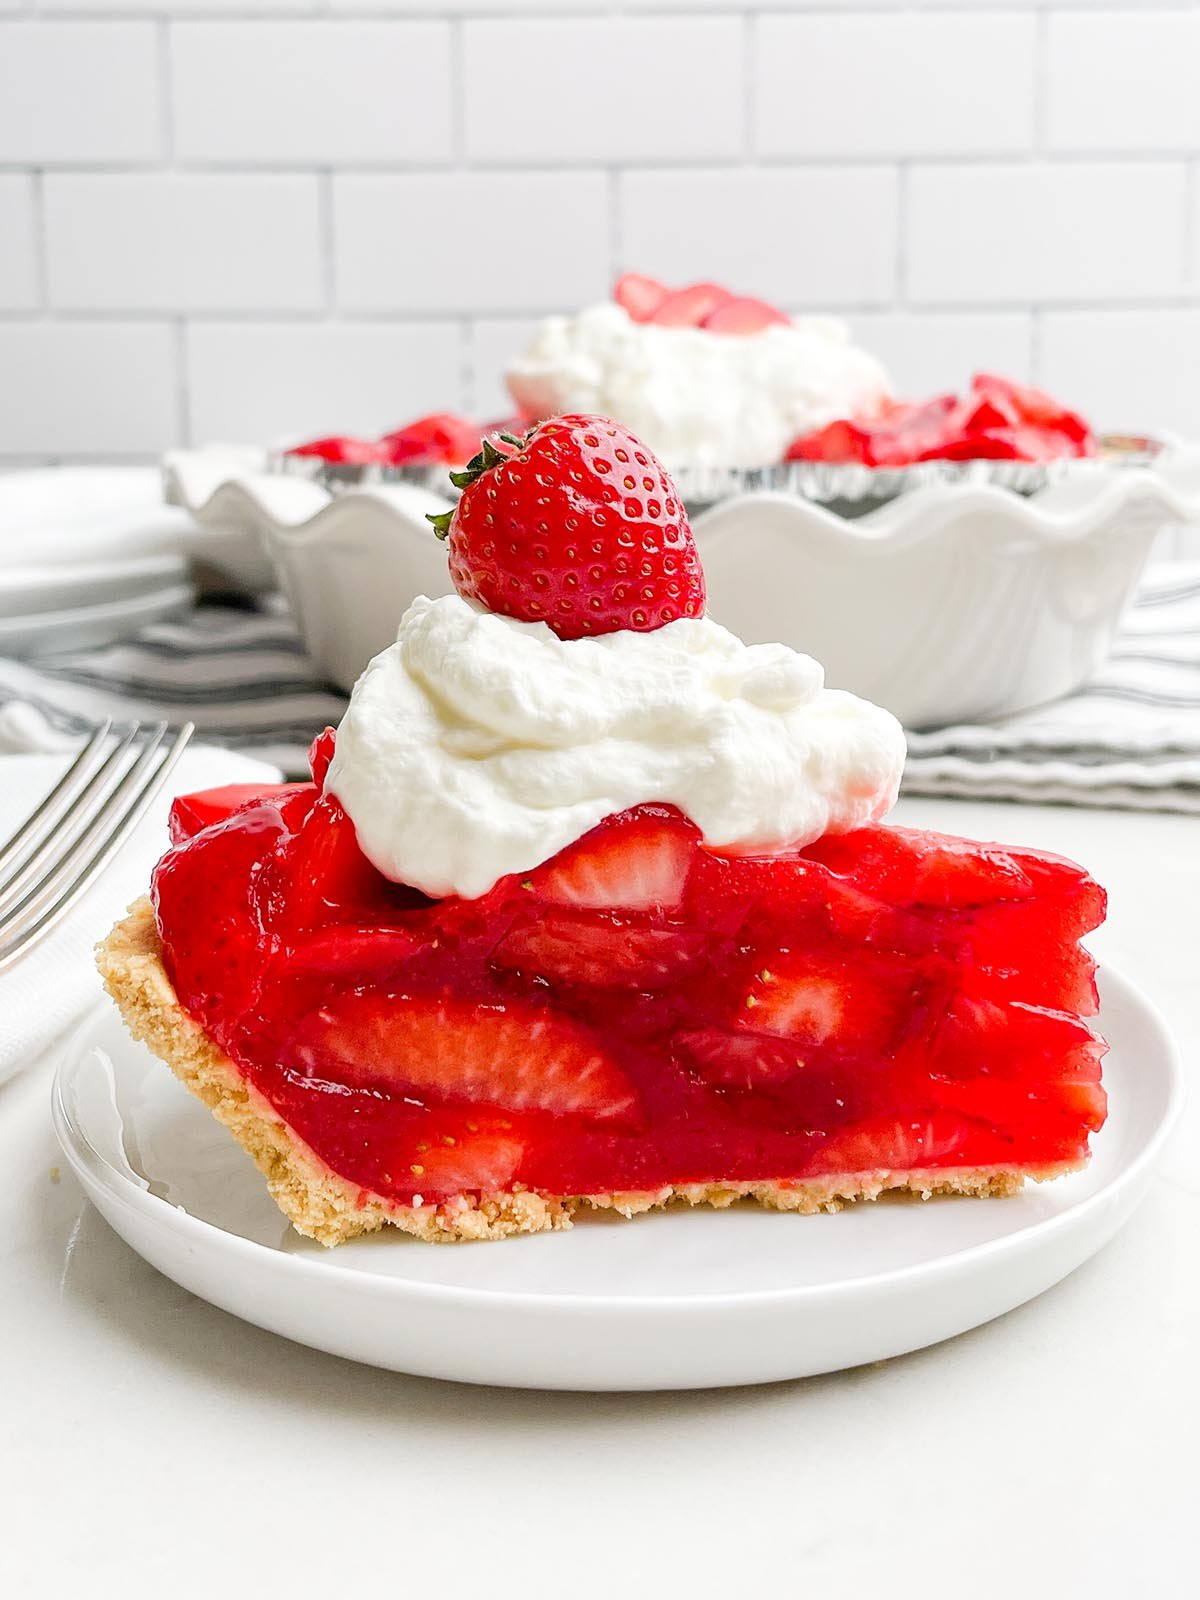 side view of piece of strawberry pie topped with whipped cream and a strawberry.